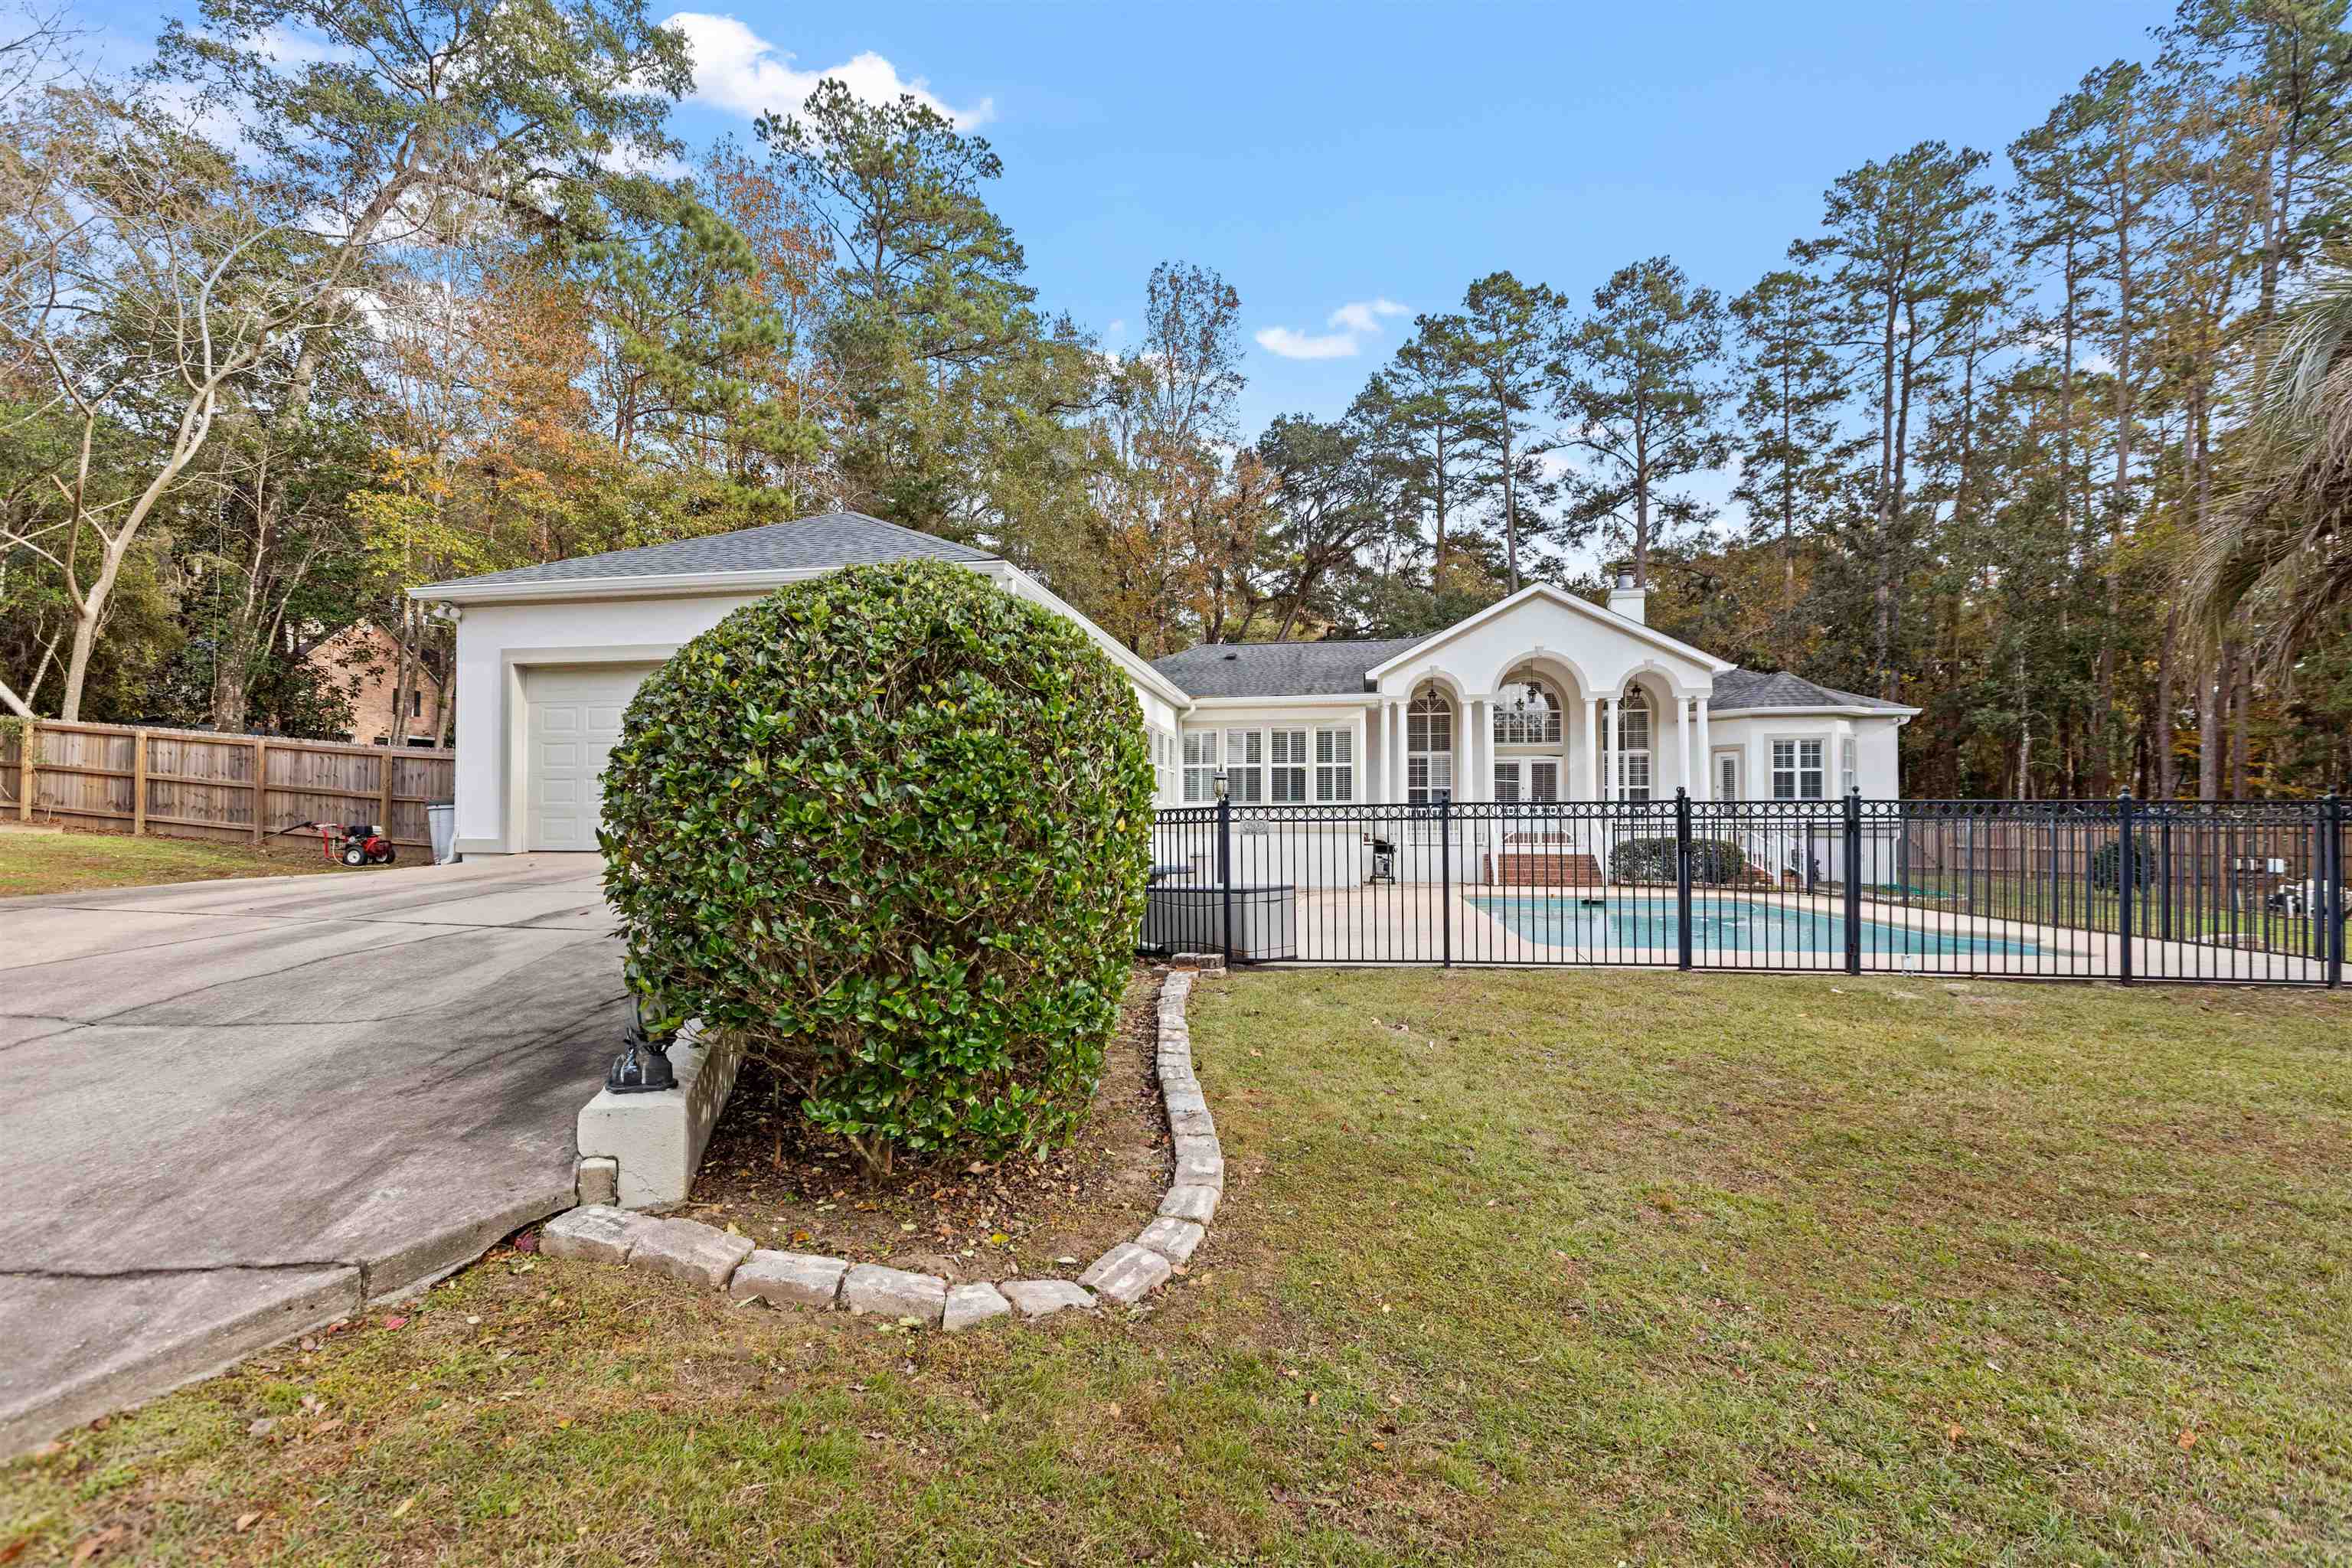 3418 Woodley Road,TALLAHASSEE,Florida 32312,4 Bedrooms Bedrooms,4 BathroomsBathrooms,Detached single family,3418 Woodley Road,366575